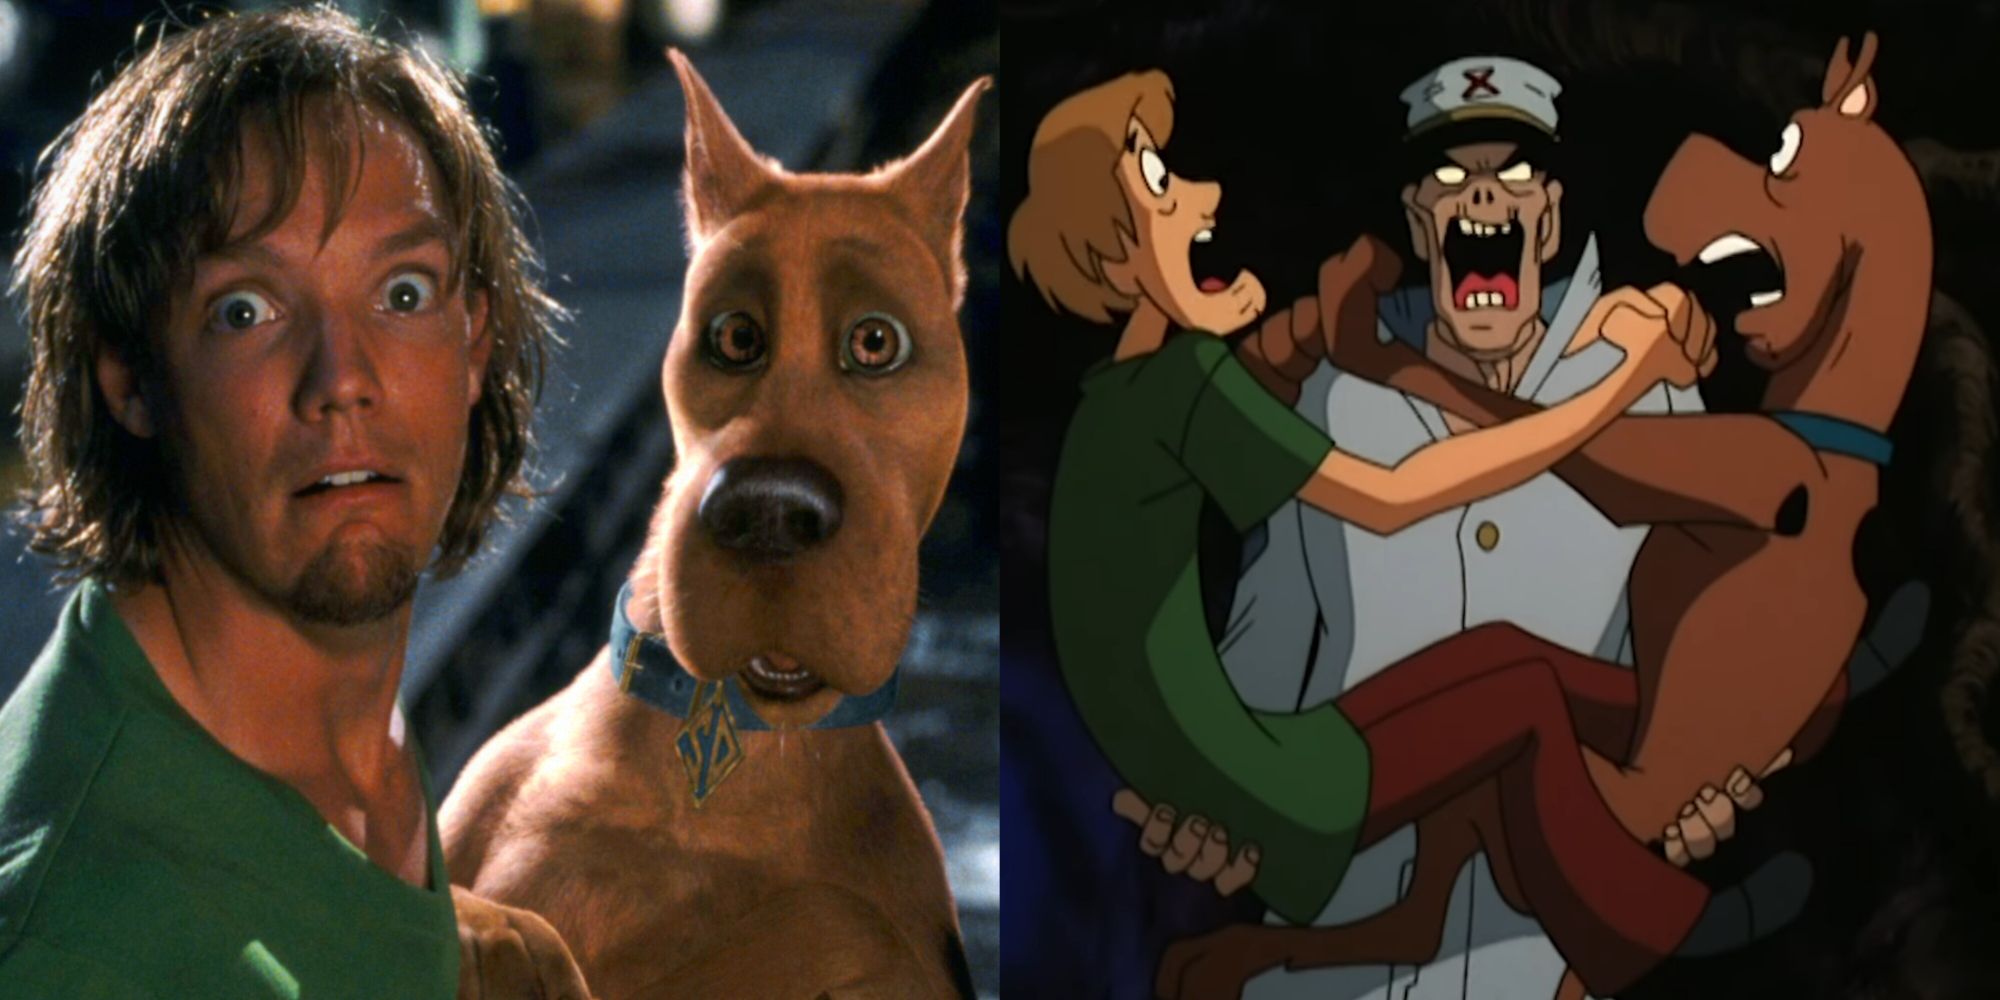 Split image of Scooby and Shaggy in Scooby-Doo The Movie (2002) and Scooby-Doo On Zombie Island